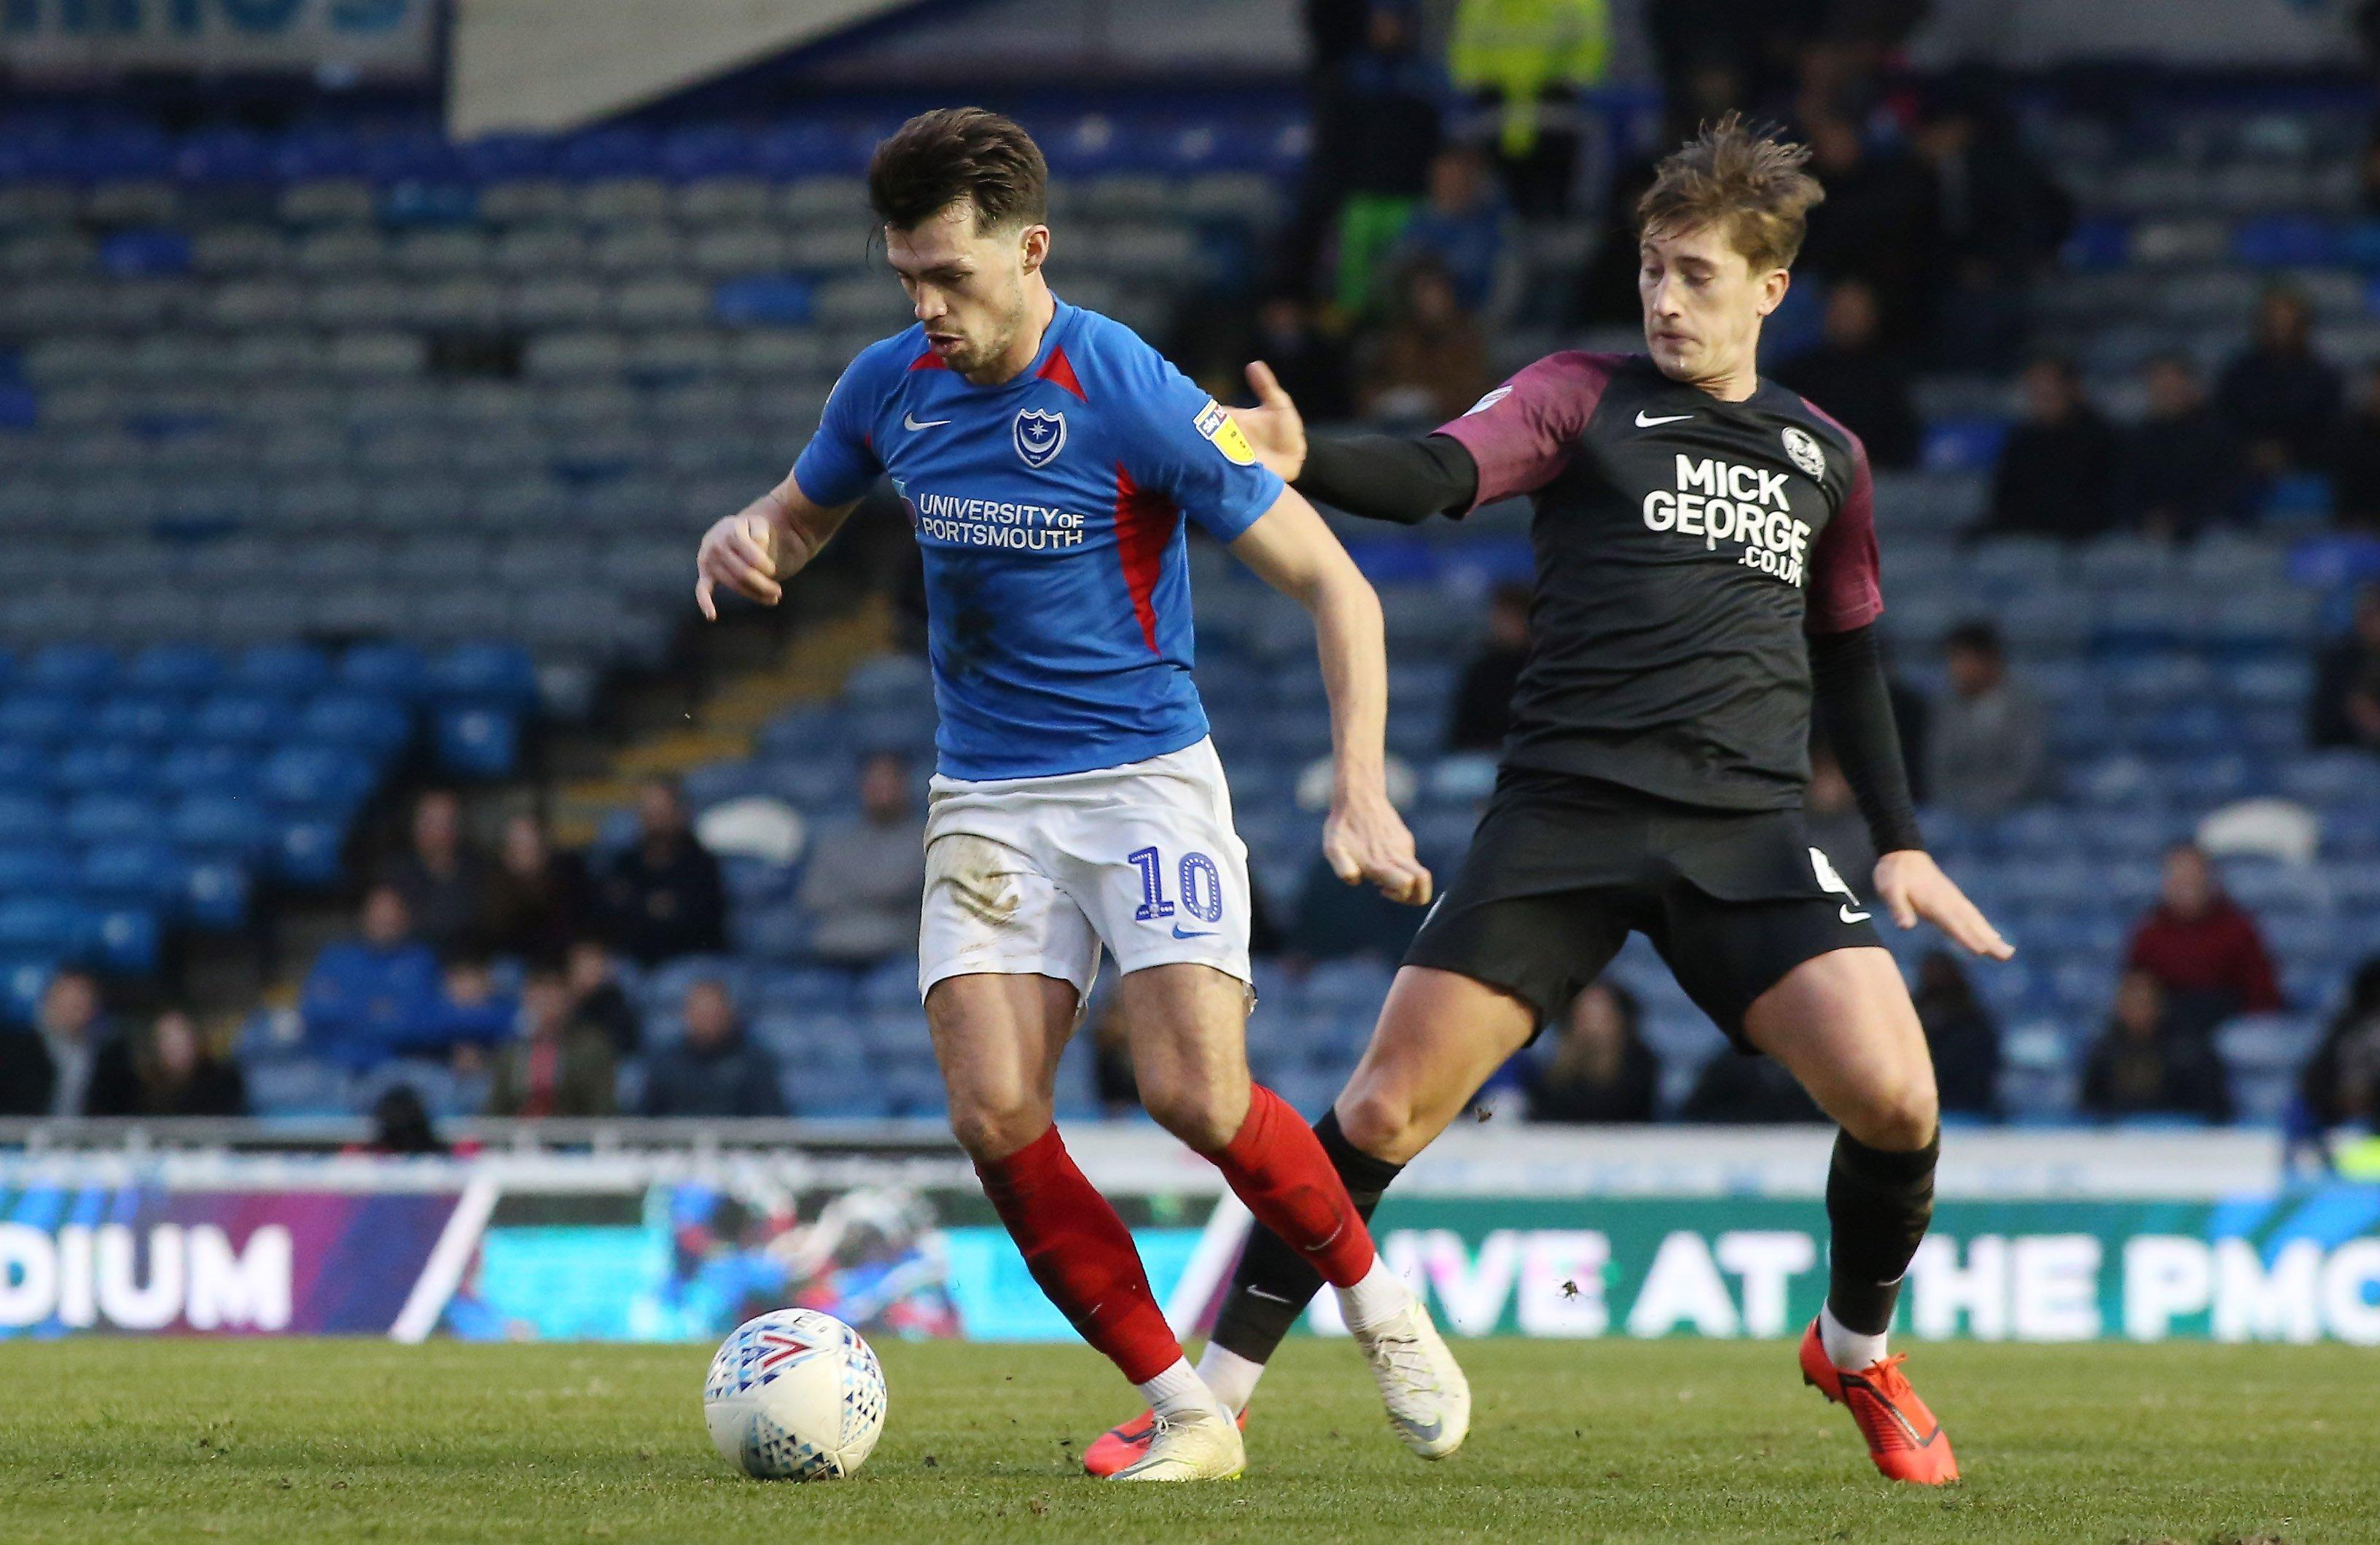 He defended well enough from a central midfield position, but he is not quick enough with his passing when Posh are in possession. Won many pressure-relieving free-kicks a la Anthony Grant.